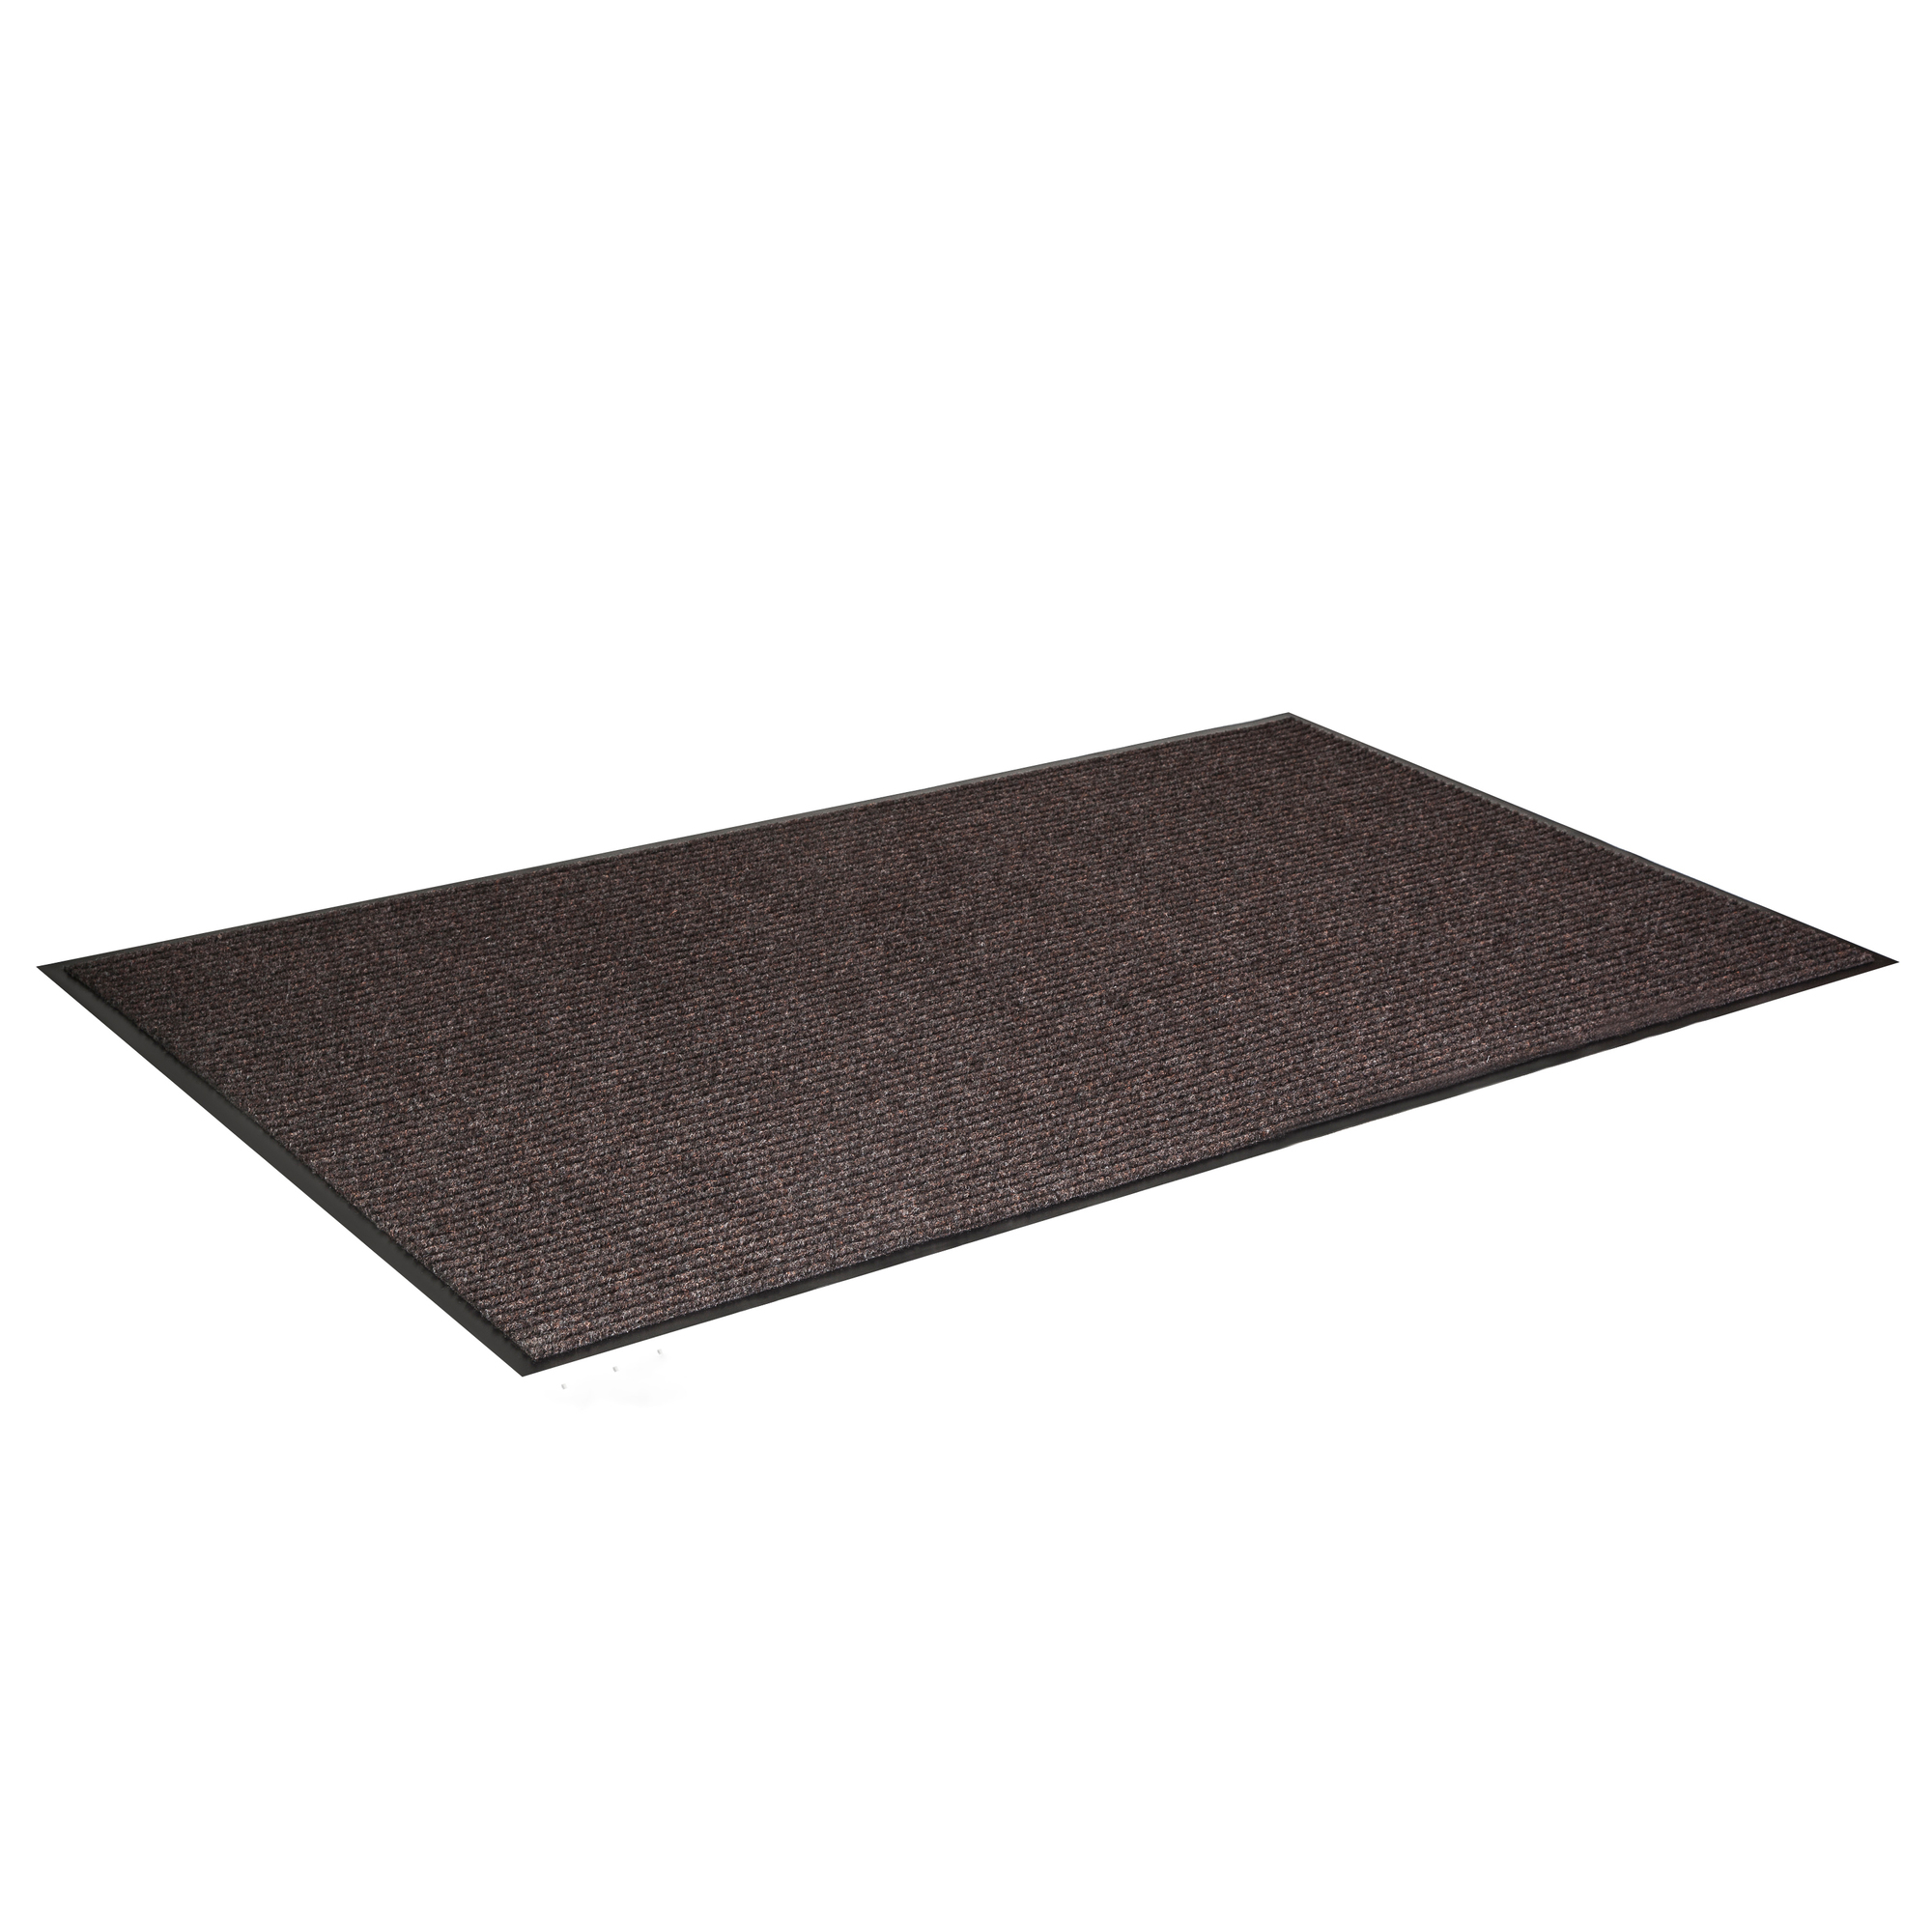 Crown Matting Technologies, Needle-Rib 3ft.x5ft. Brown, Width 36 in, Length 60 in, Thickness 5/16 in, Model NR 0035BR